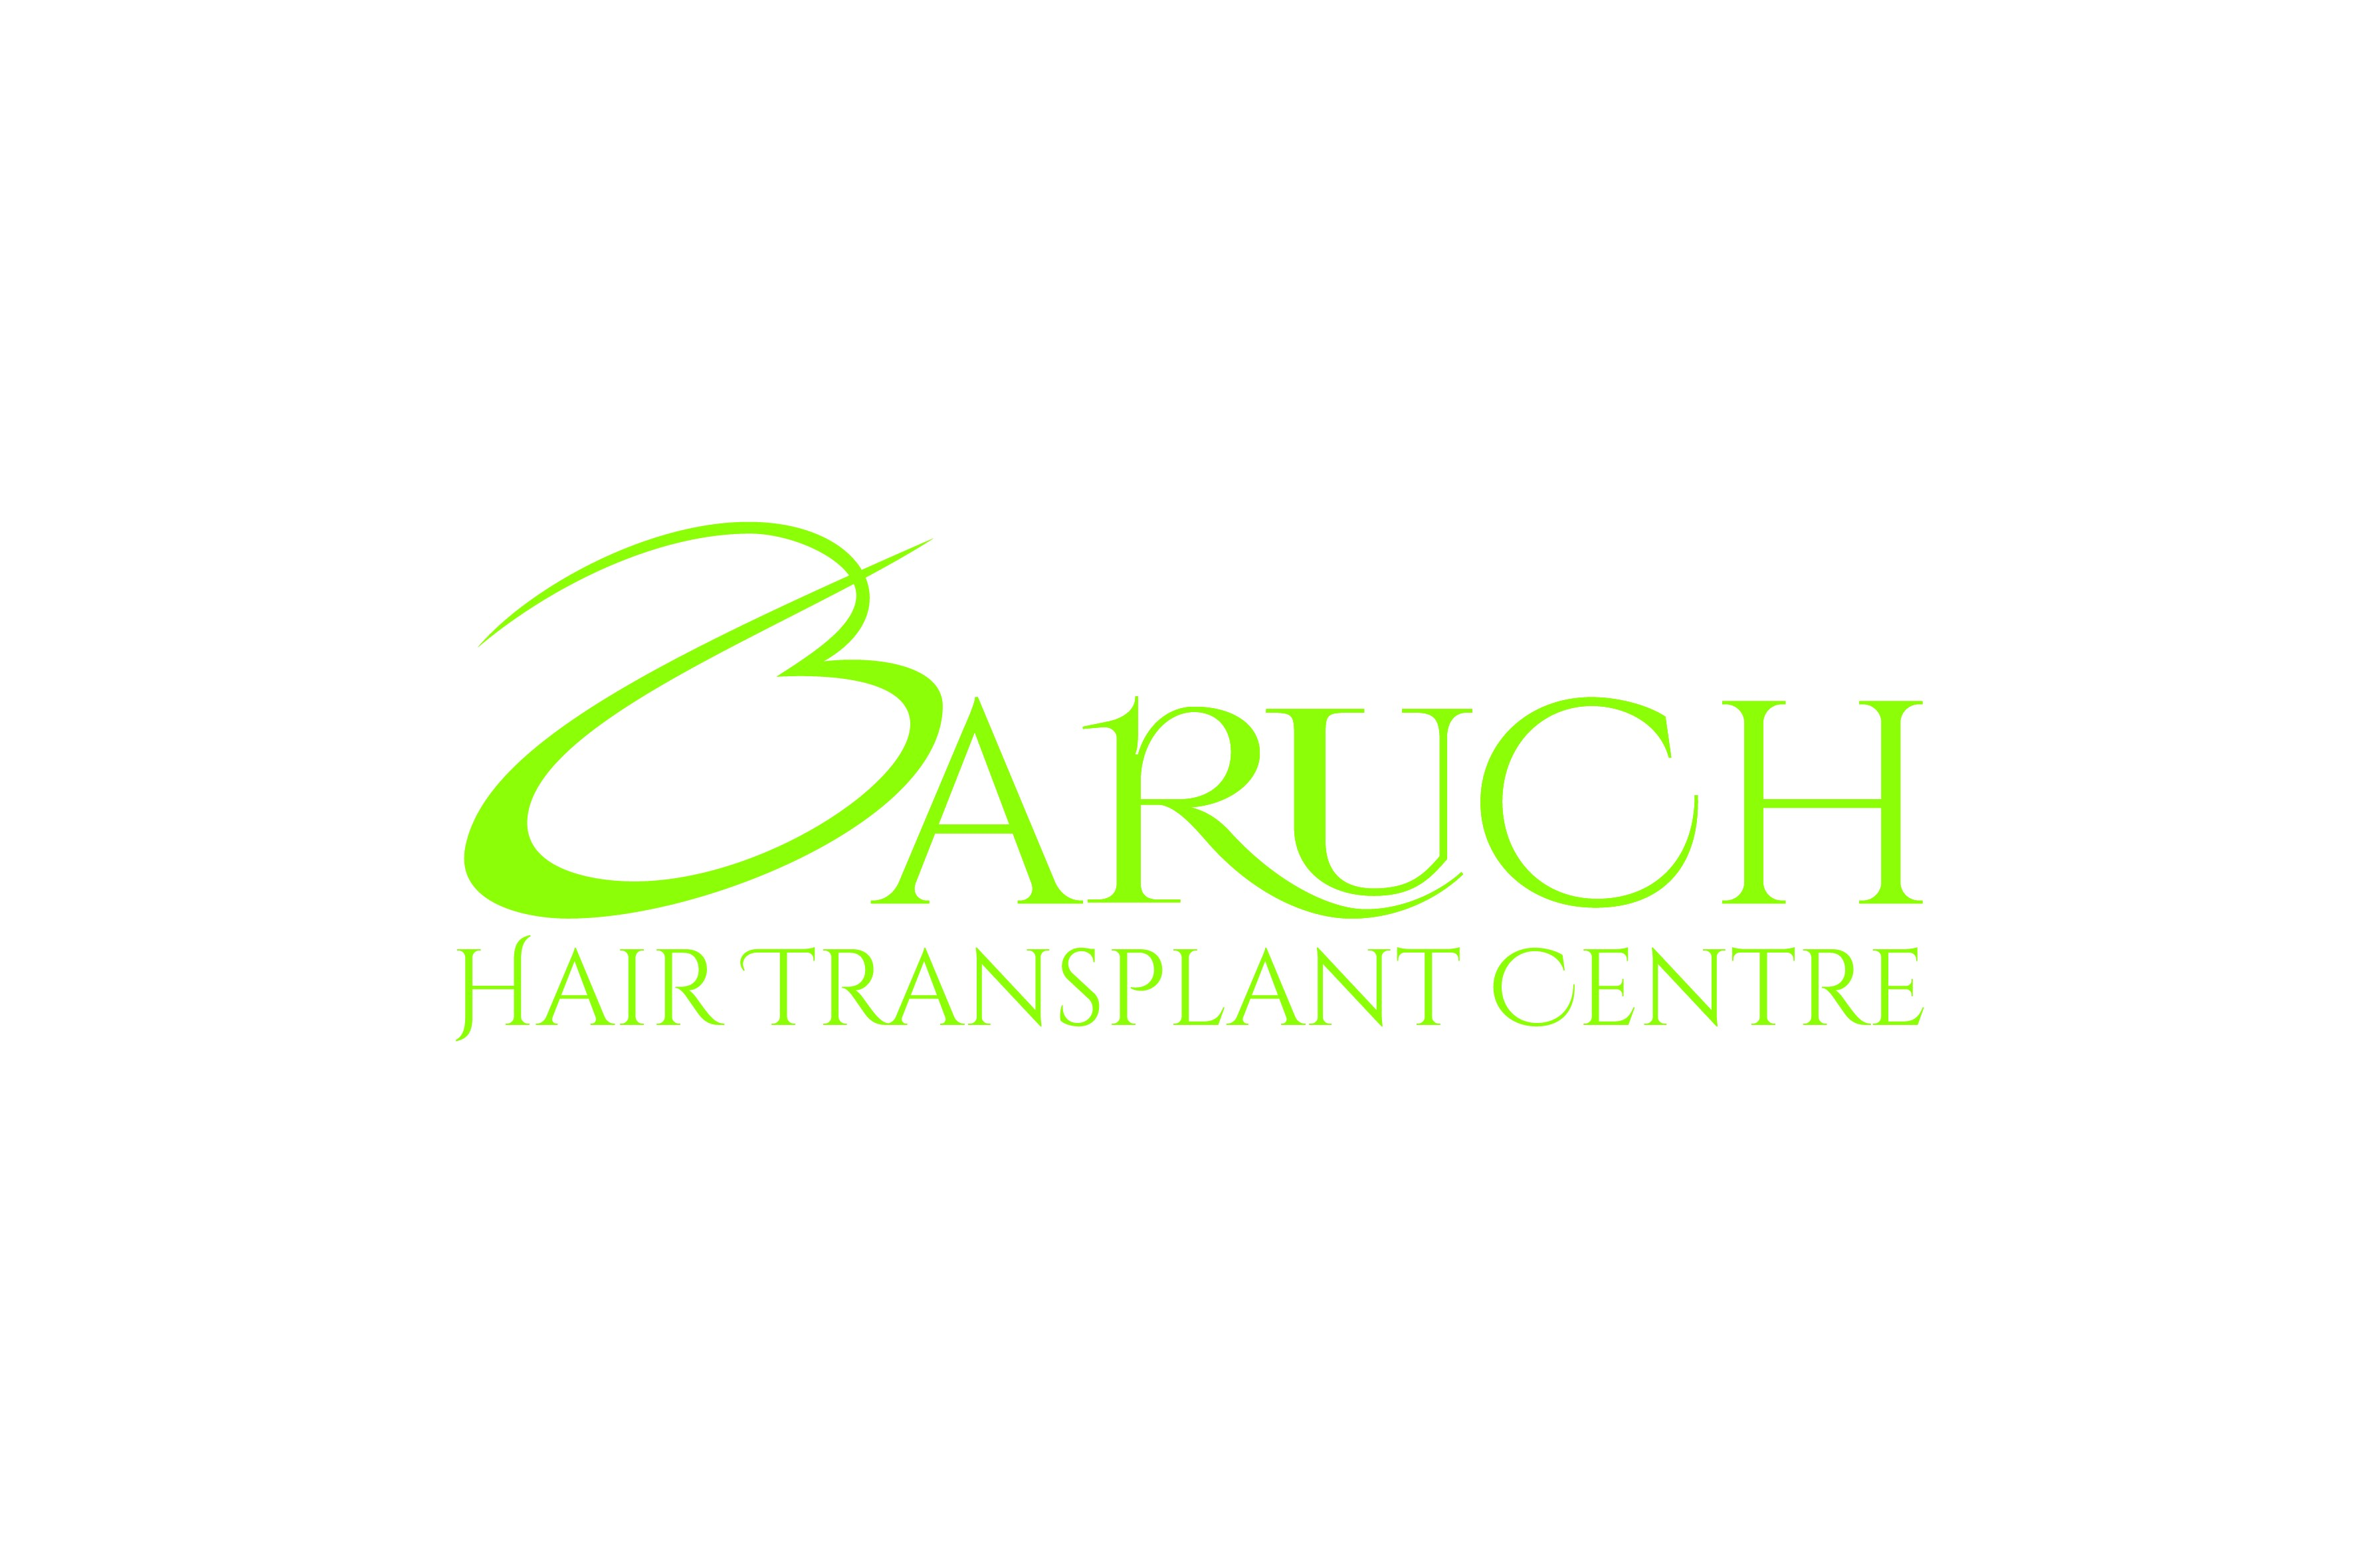 Baruch Hair Transplant Centre Limited